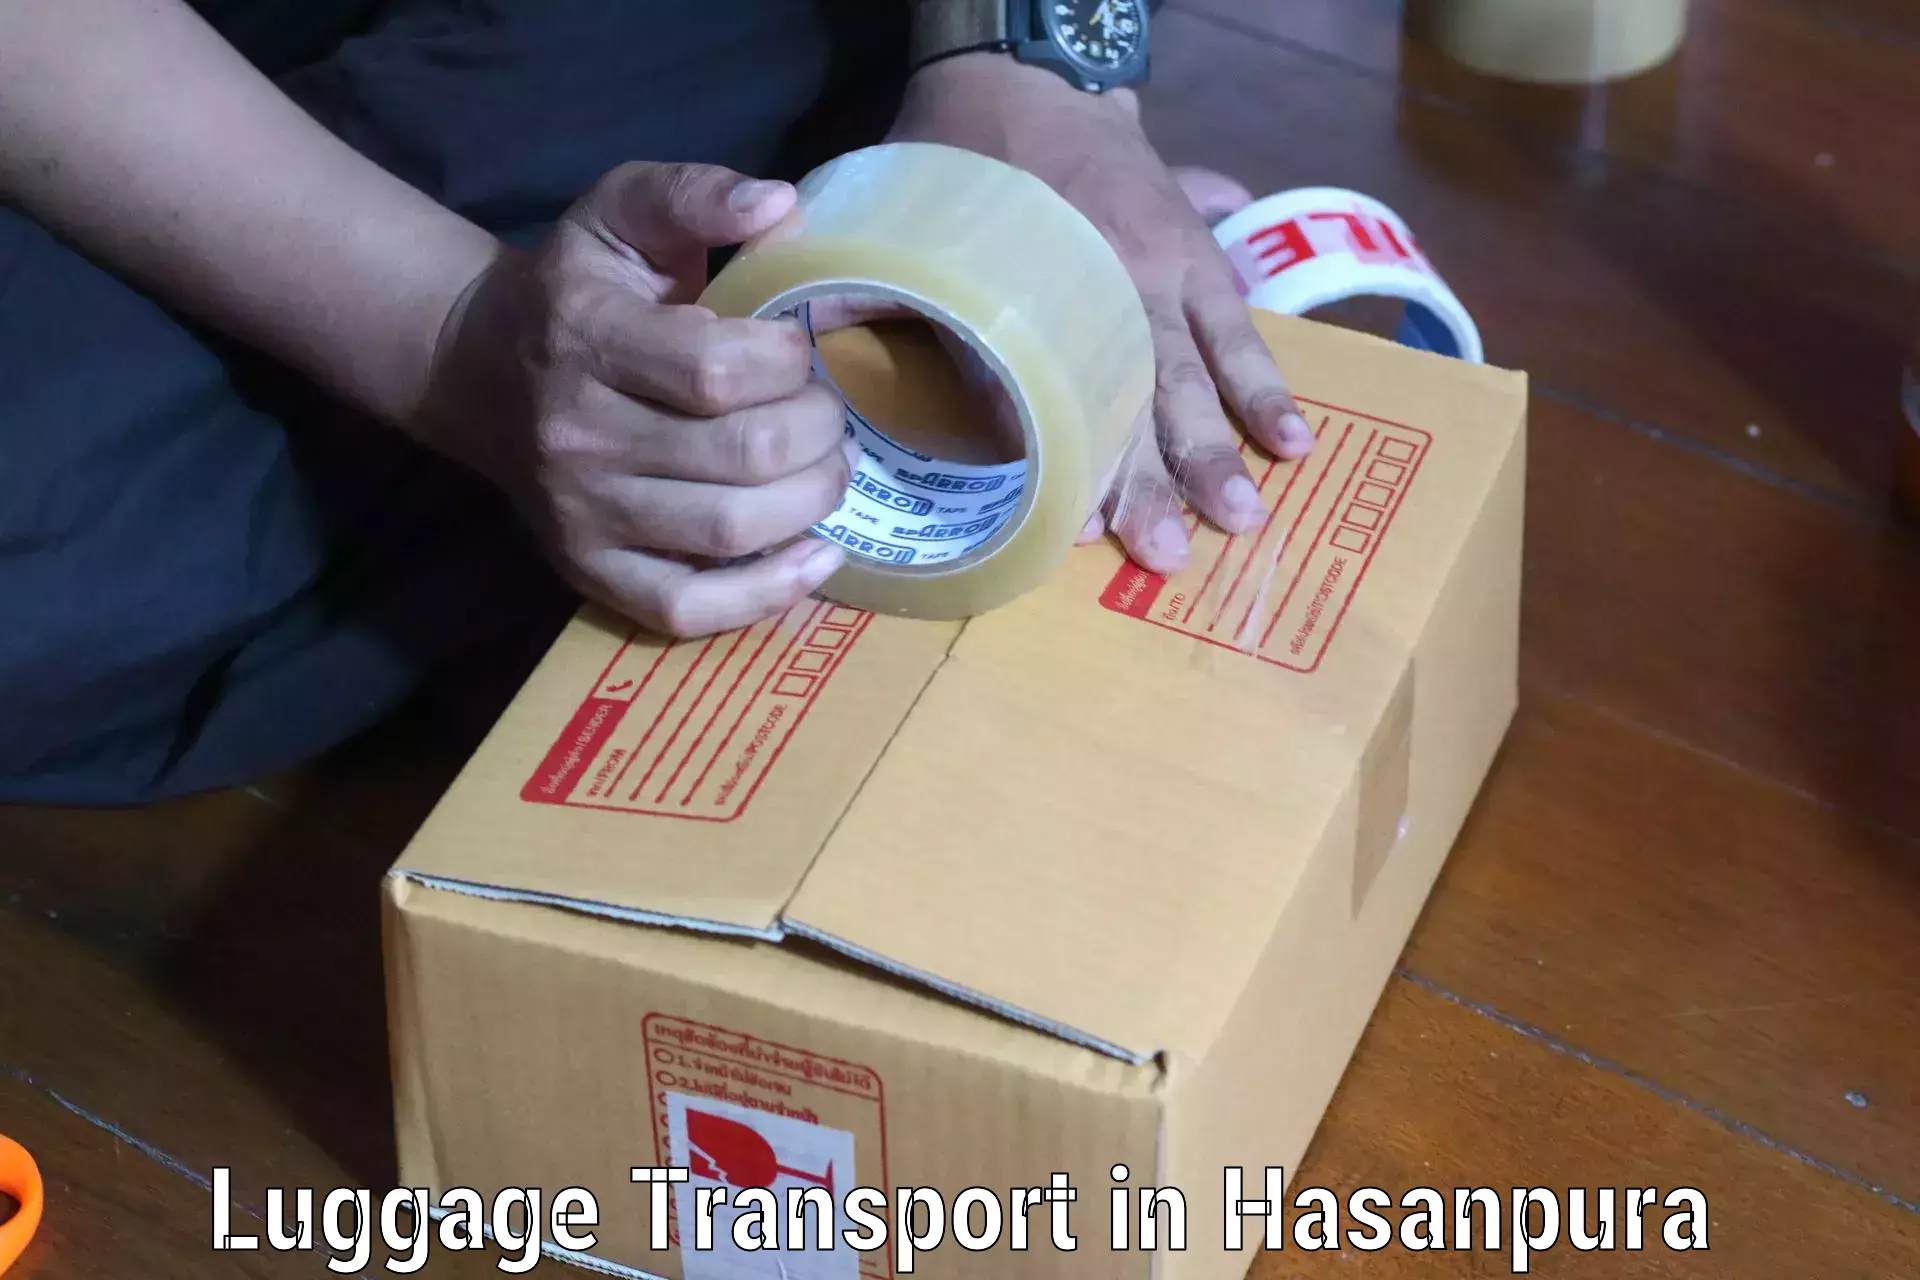 Luggage storage and delivery in Hasanpura